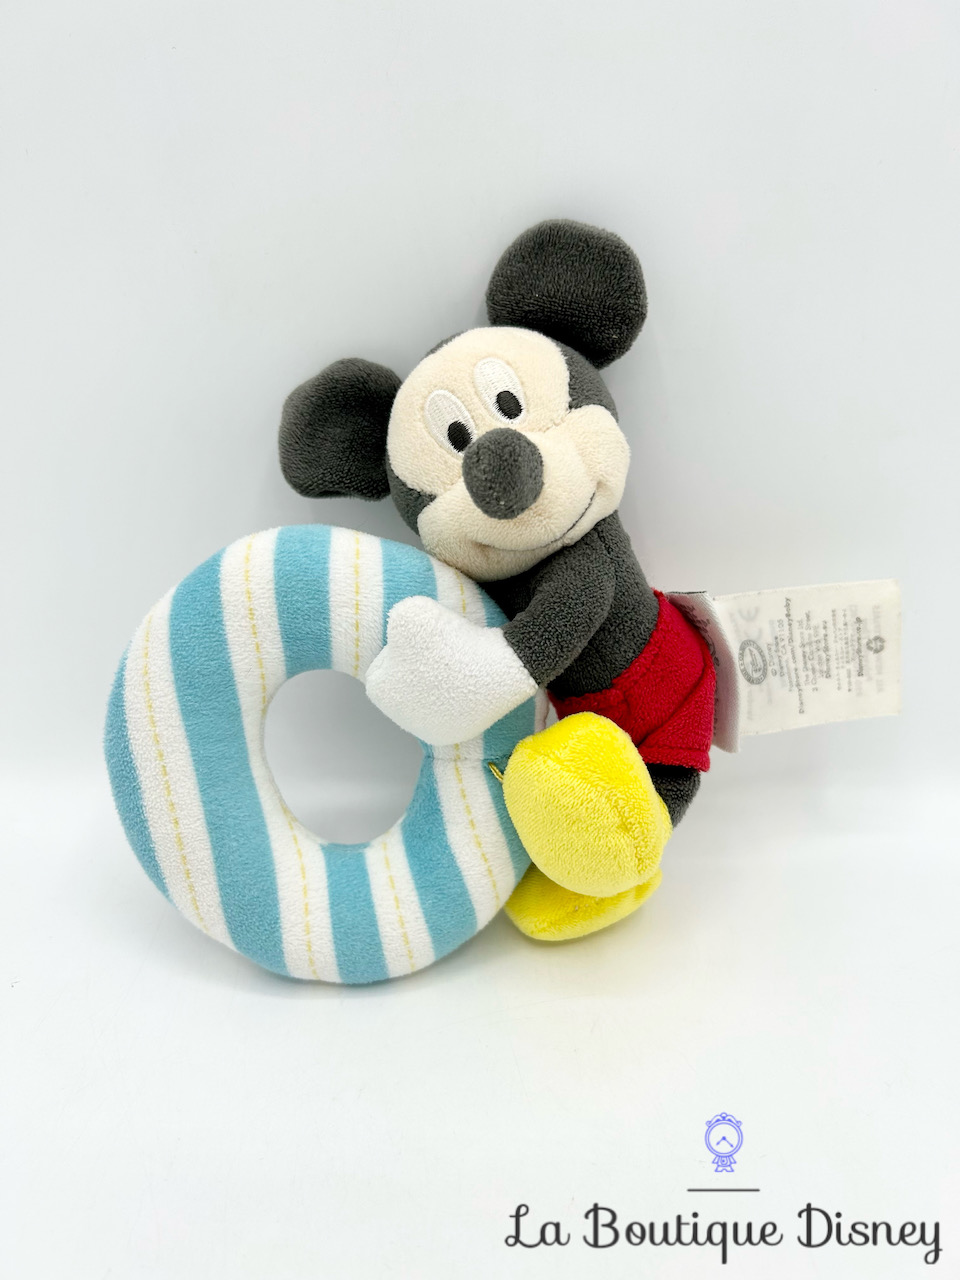 hochet-mickey-mouse-peluche-disney-store-anneau-rayures-2